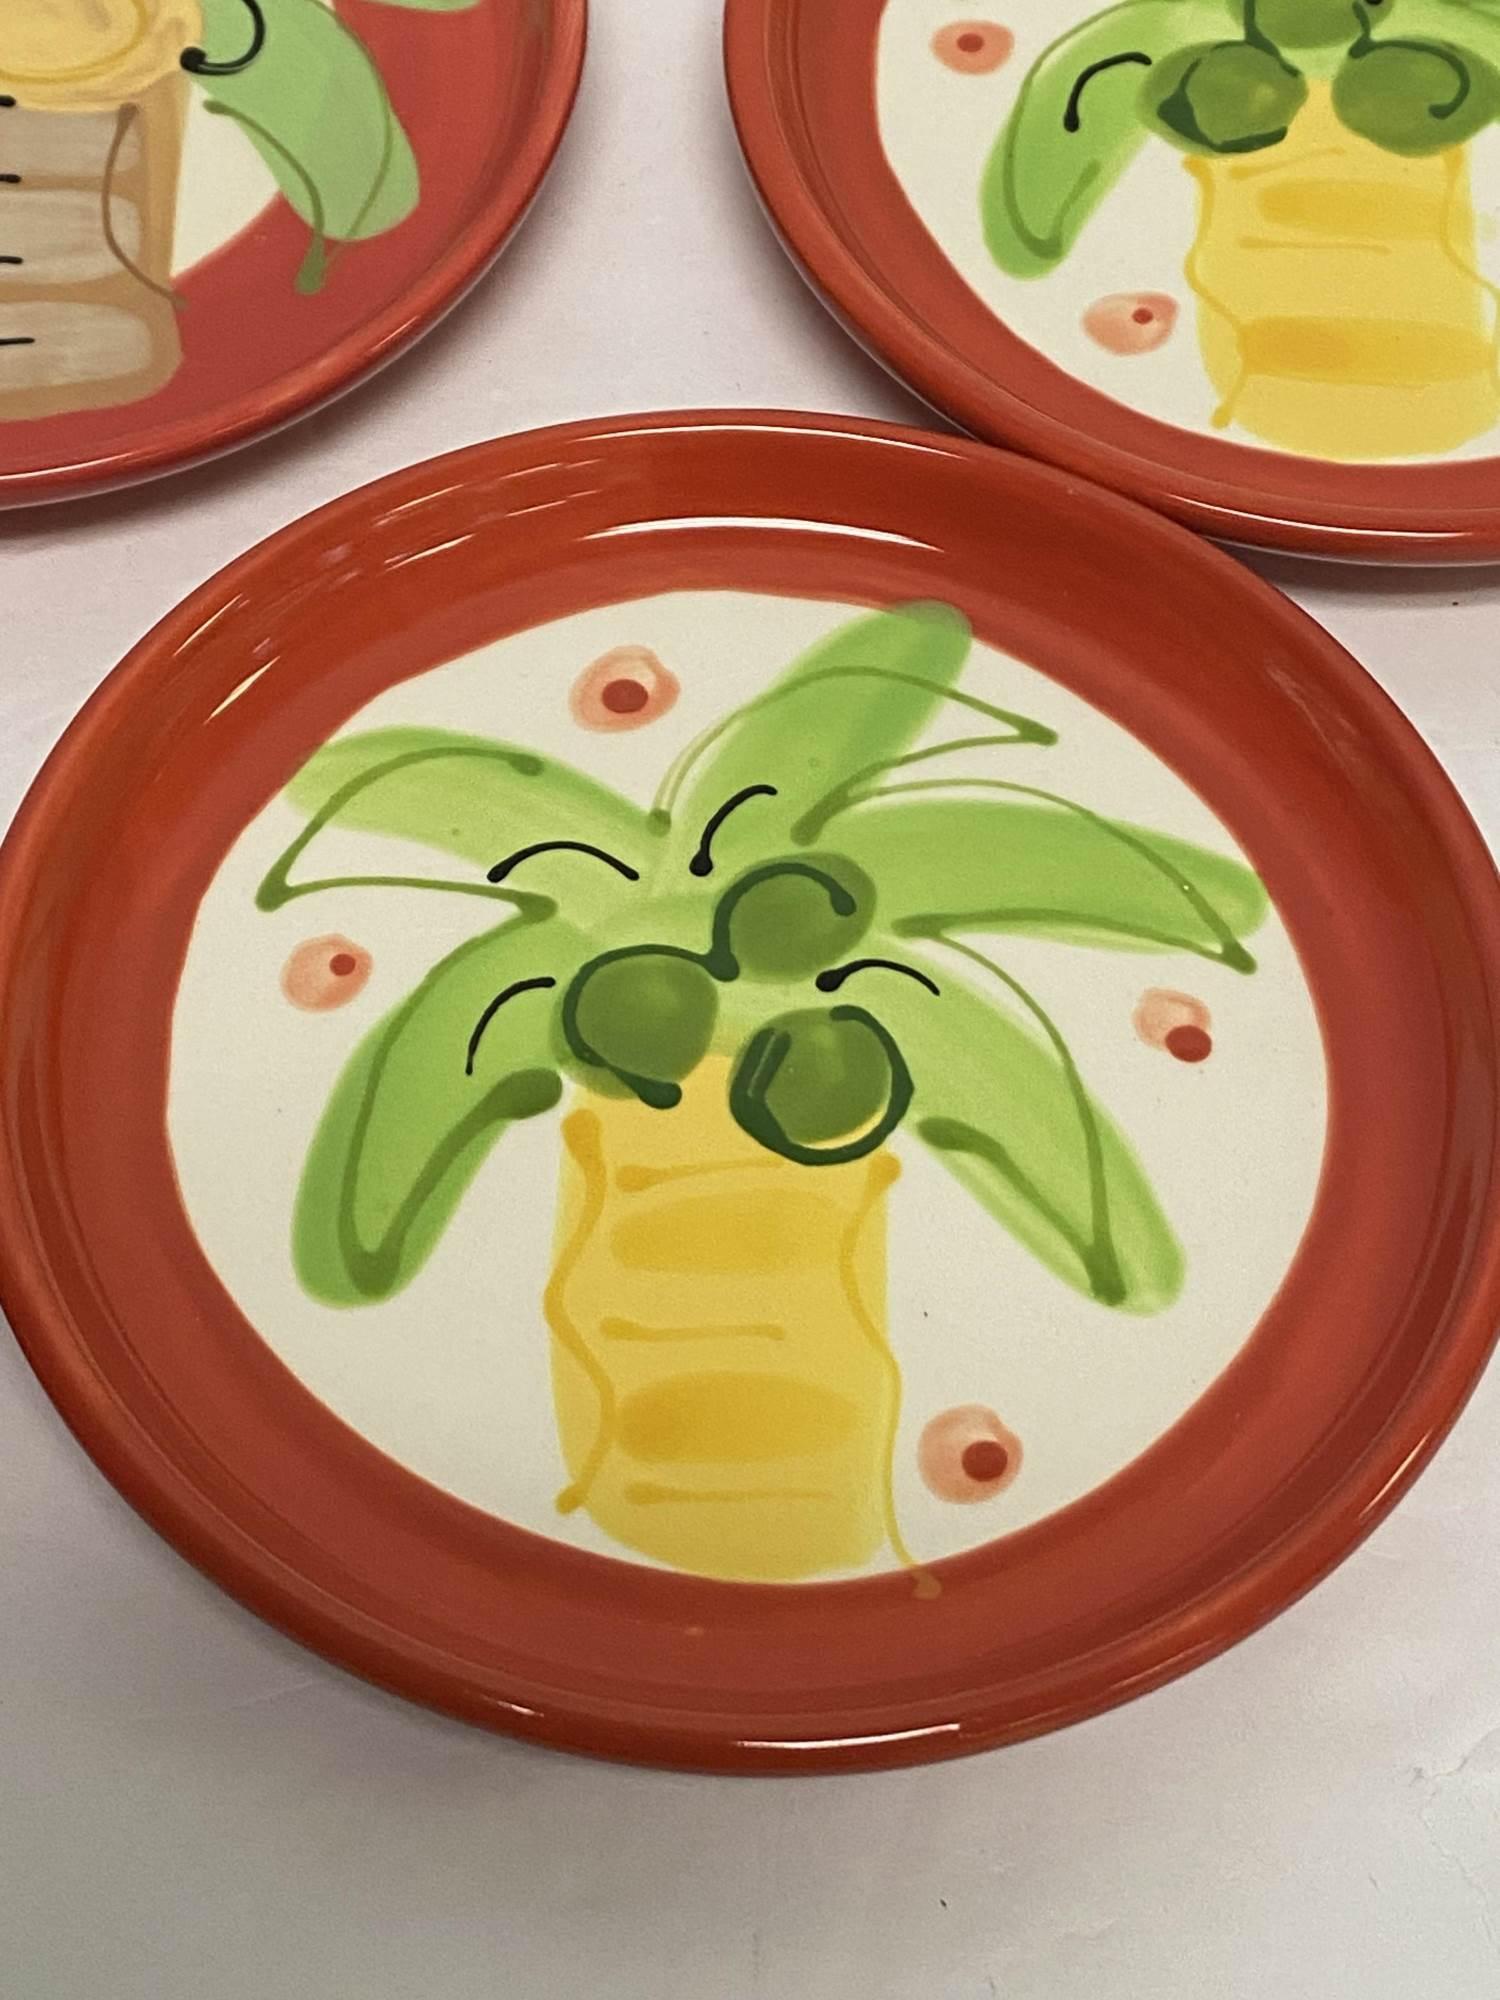 8 - 6" PLATES BY SUSAN PAINTER